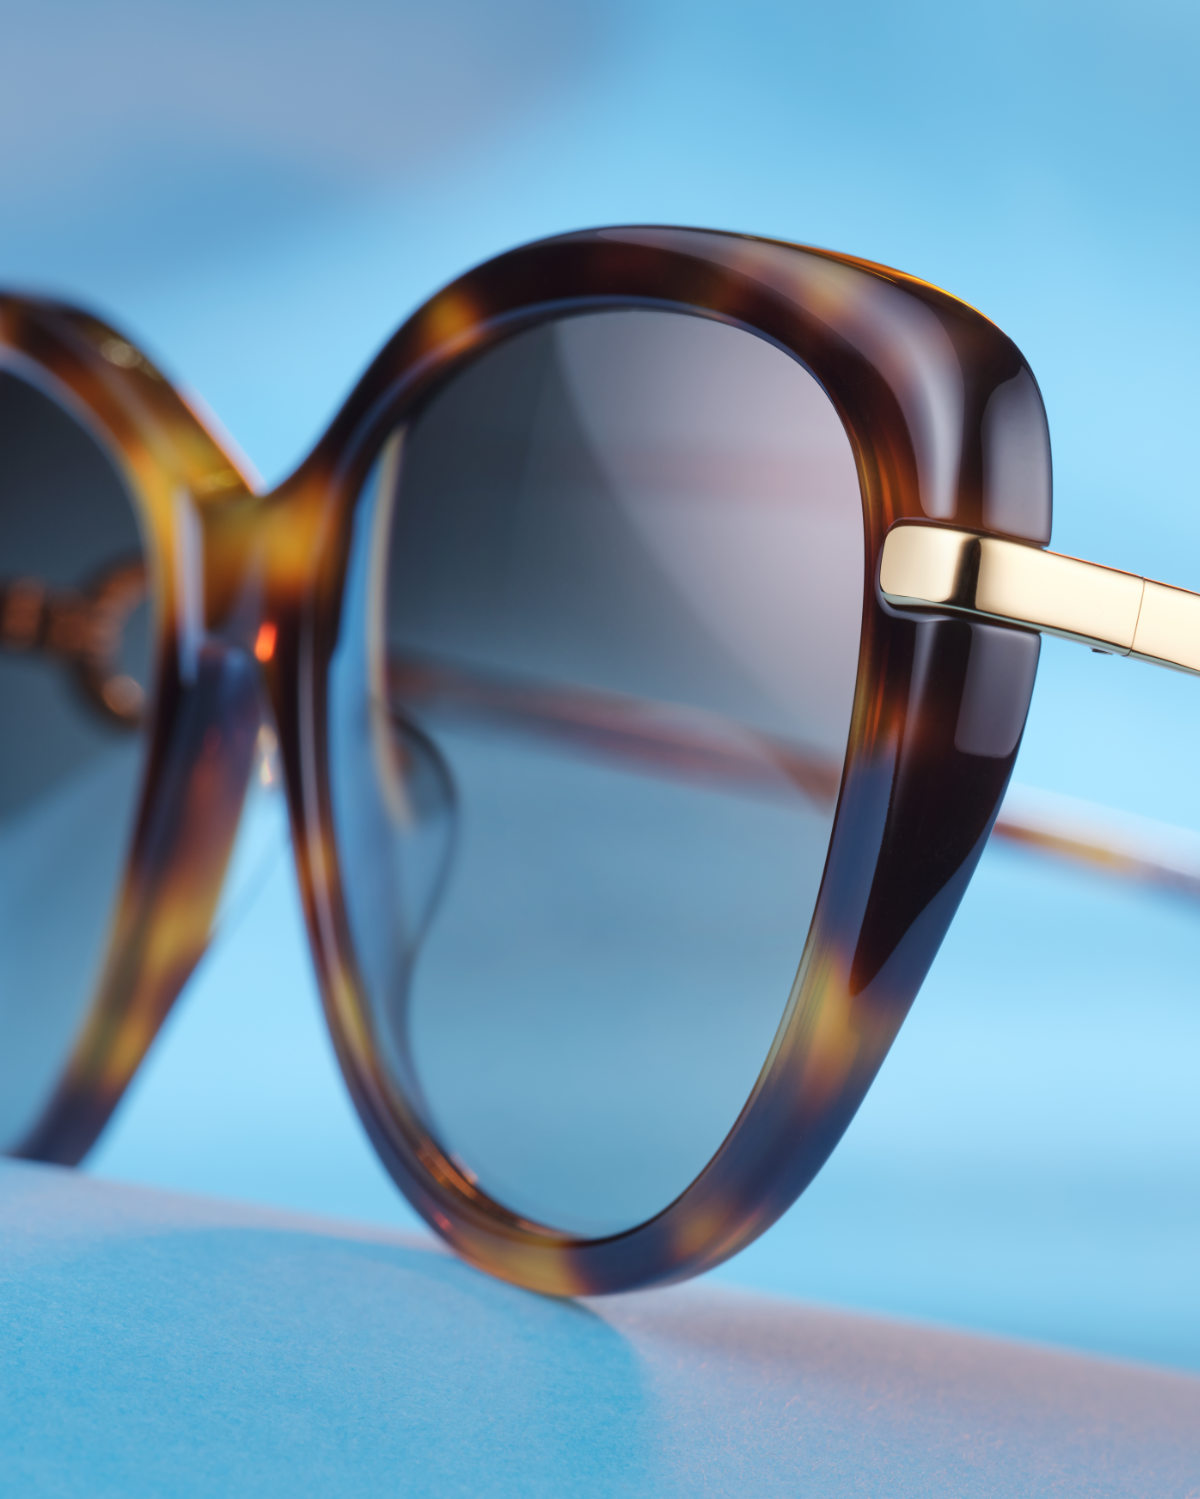 New Summer Styles In The OMEGA Sunglasses Collection